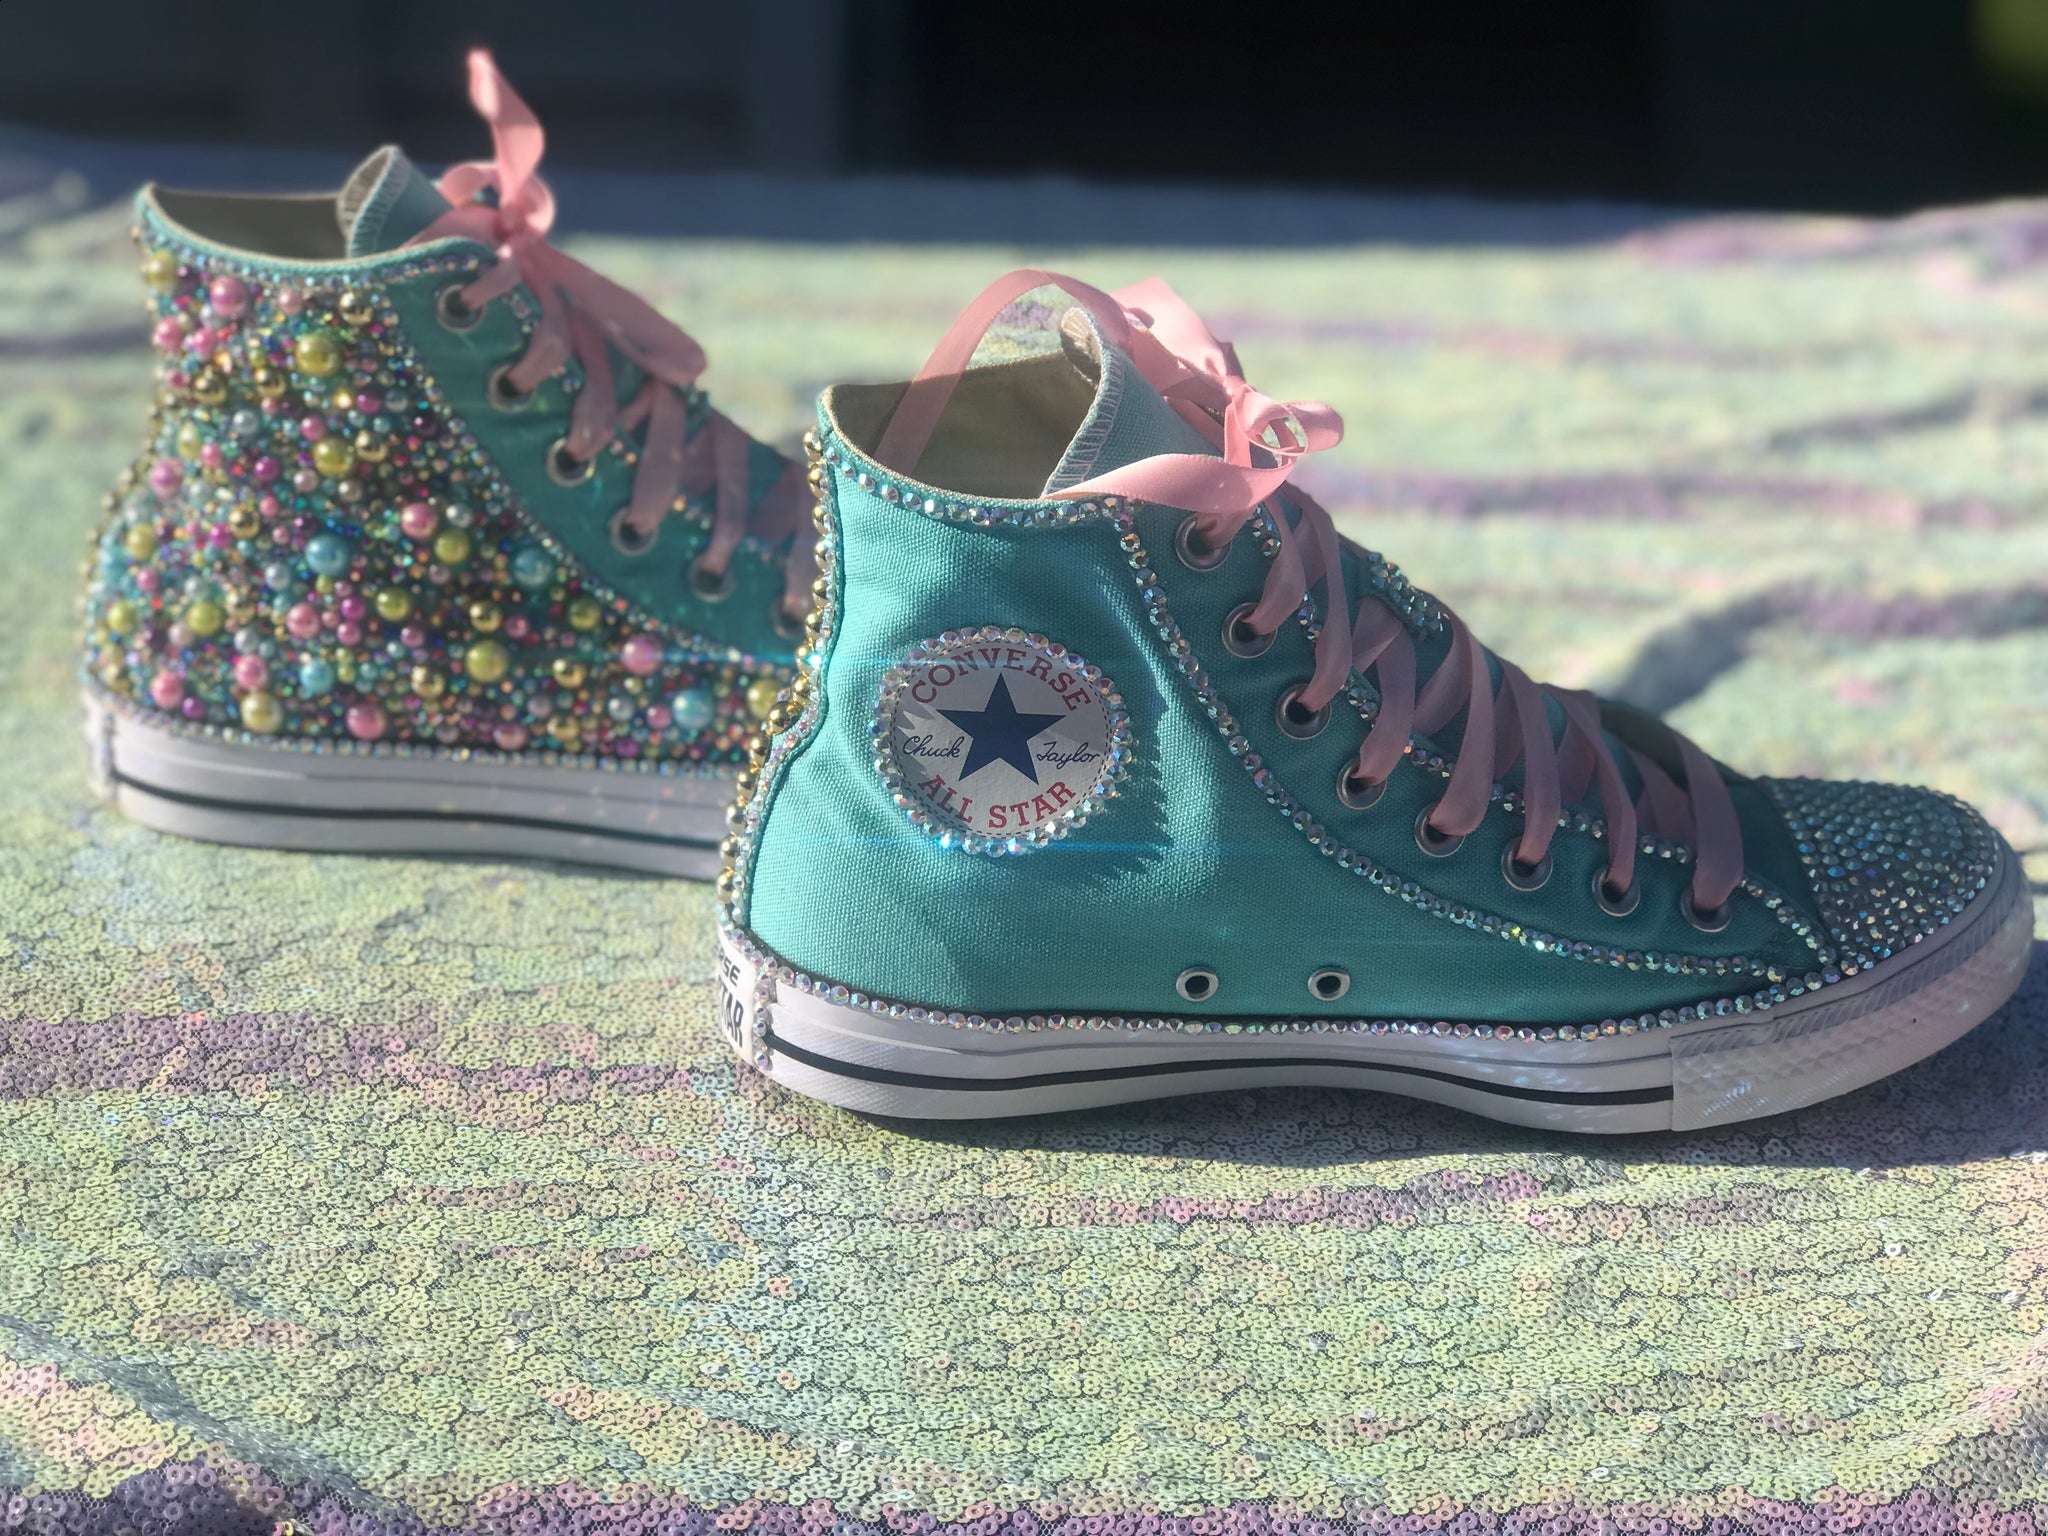 Unicorn Custom Converse Sneakers, Infants and Toddler Shoe Size 2